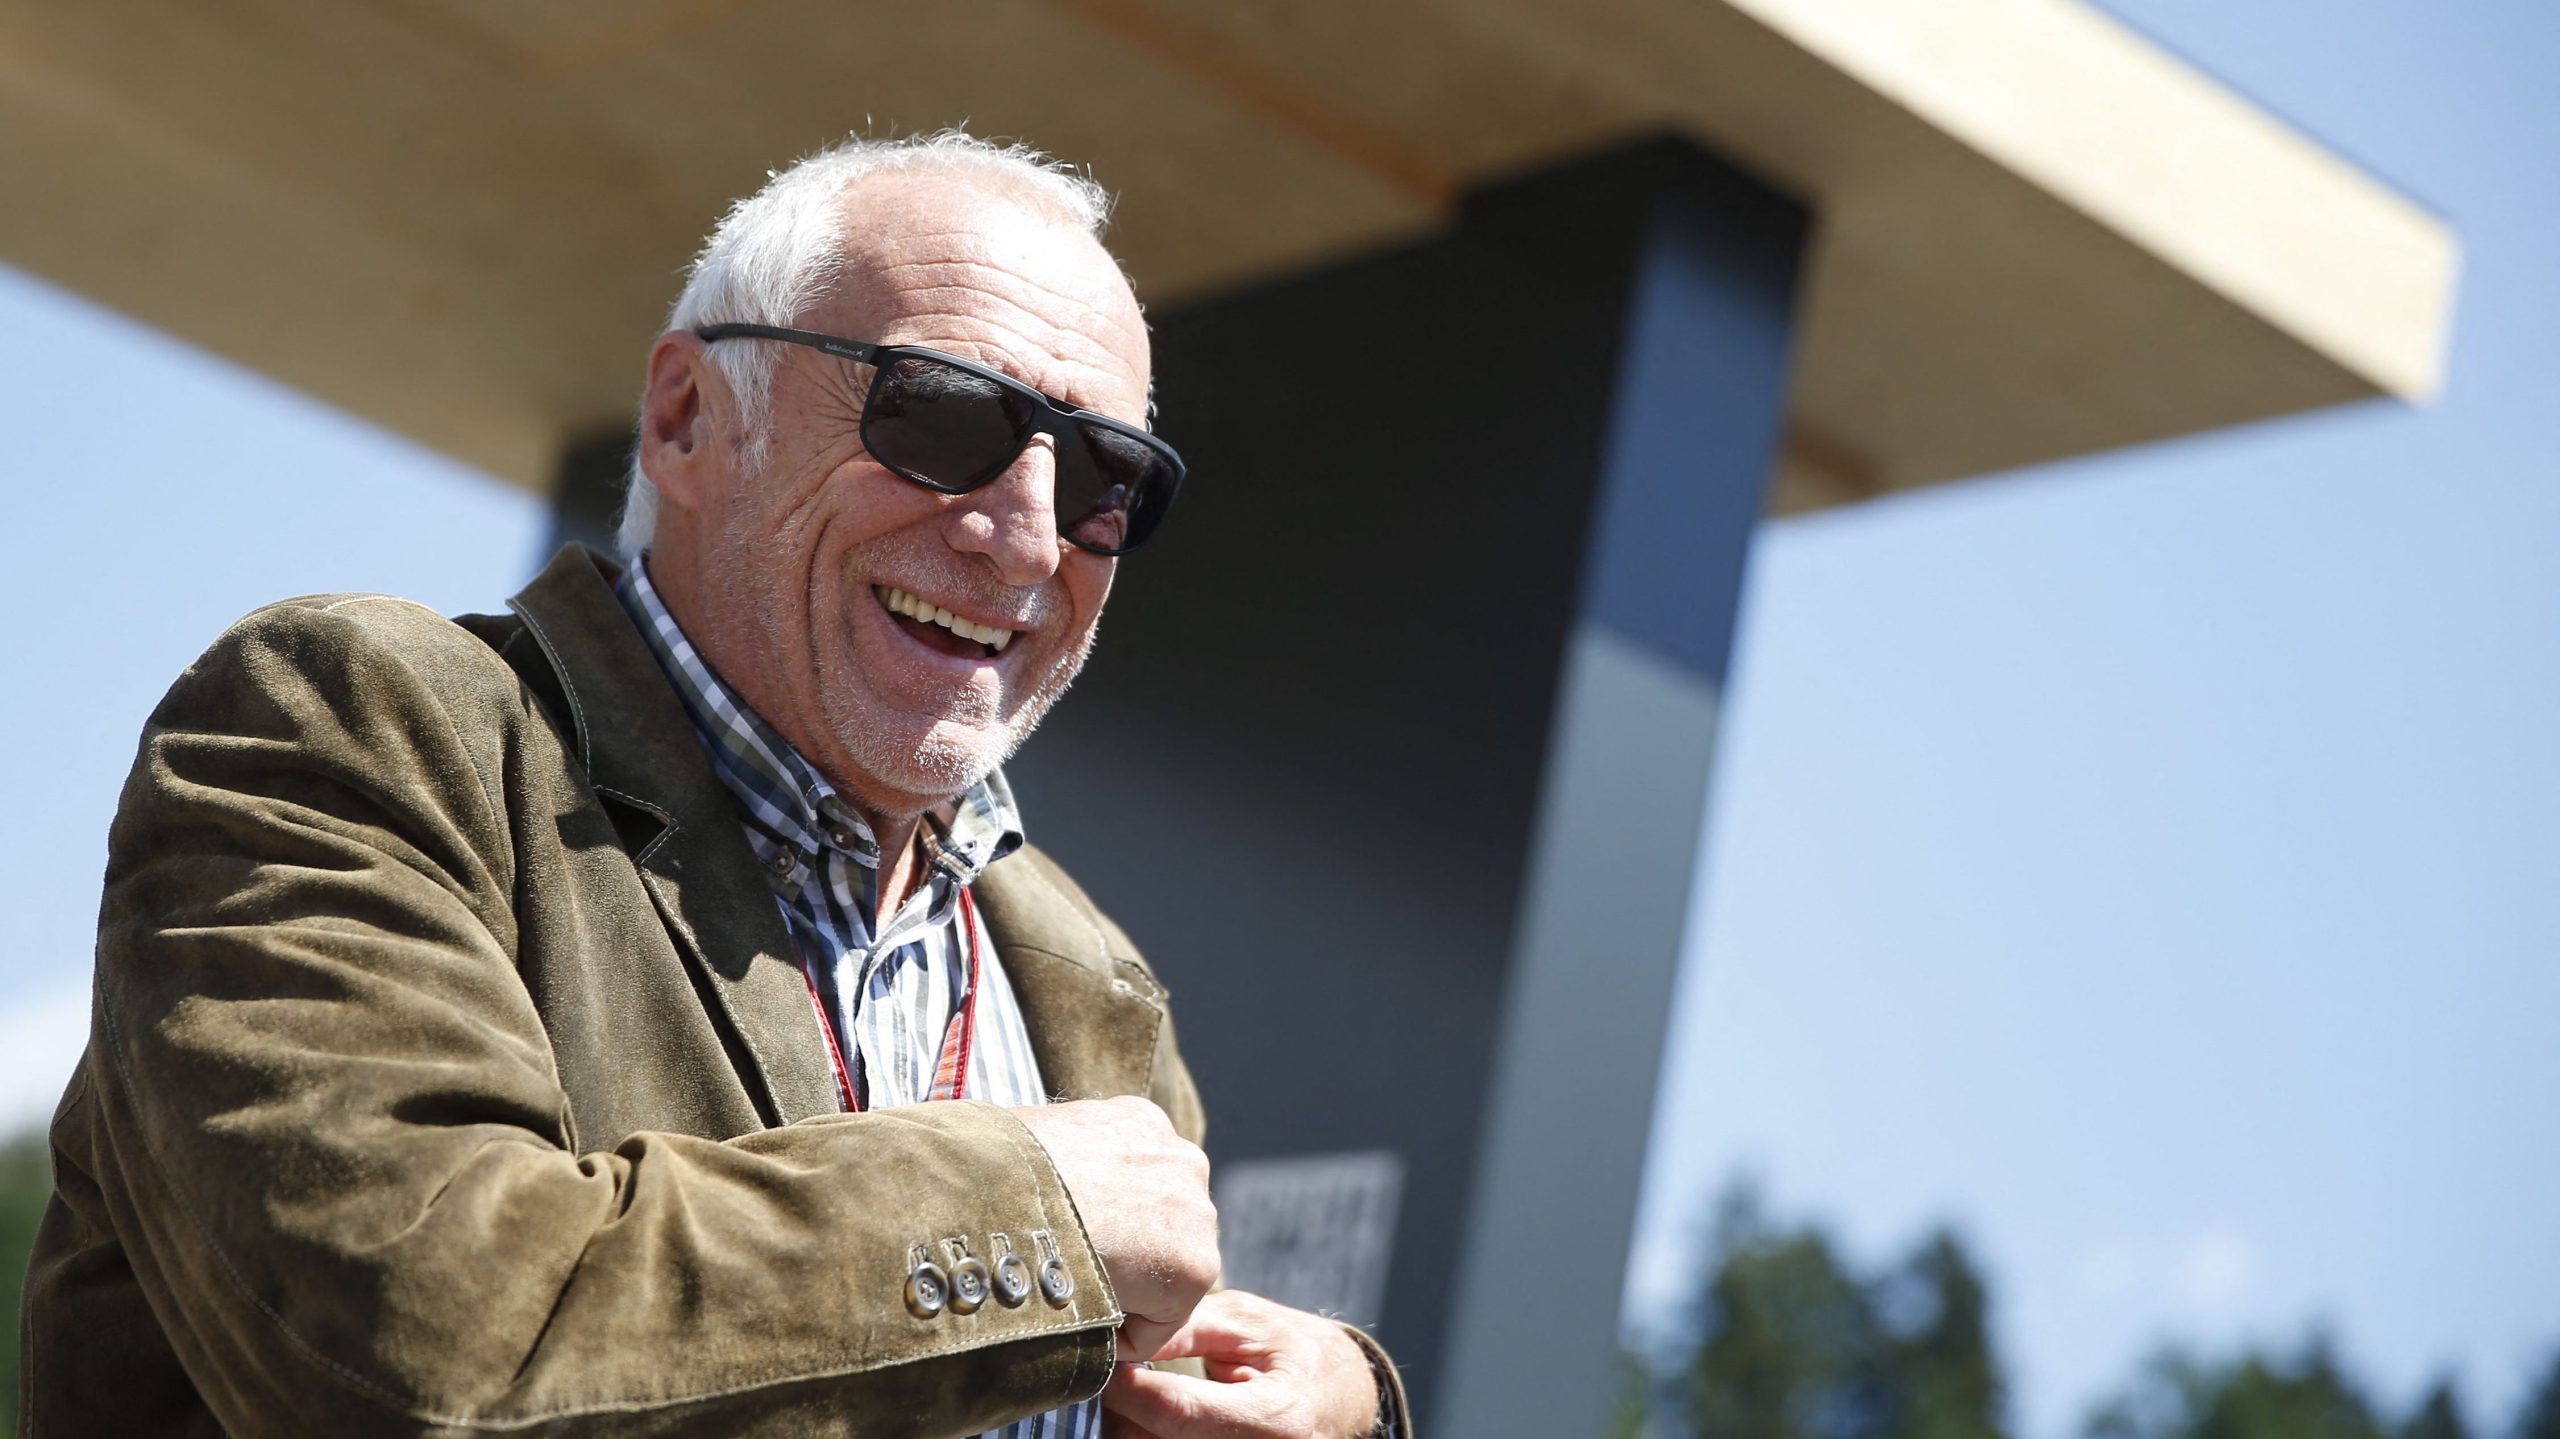 Dietrich Matschitz, owner and co-founder of Red Bull, has passed away